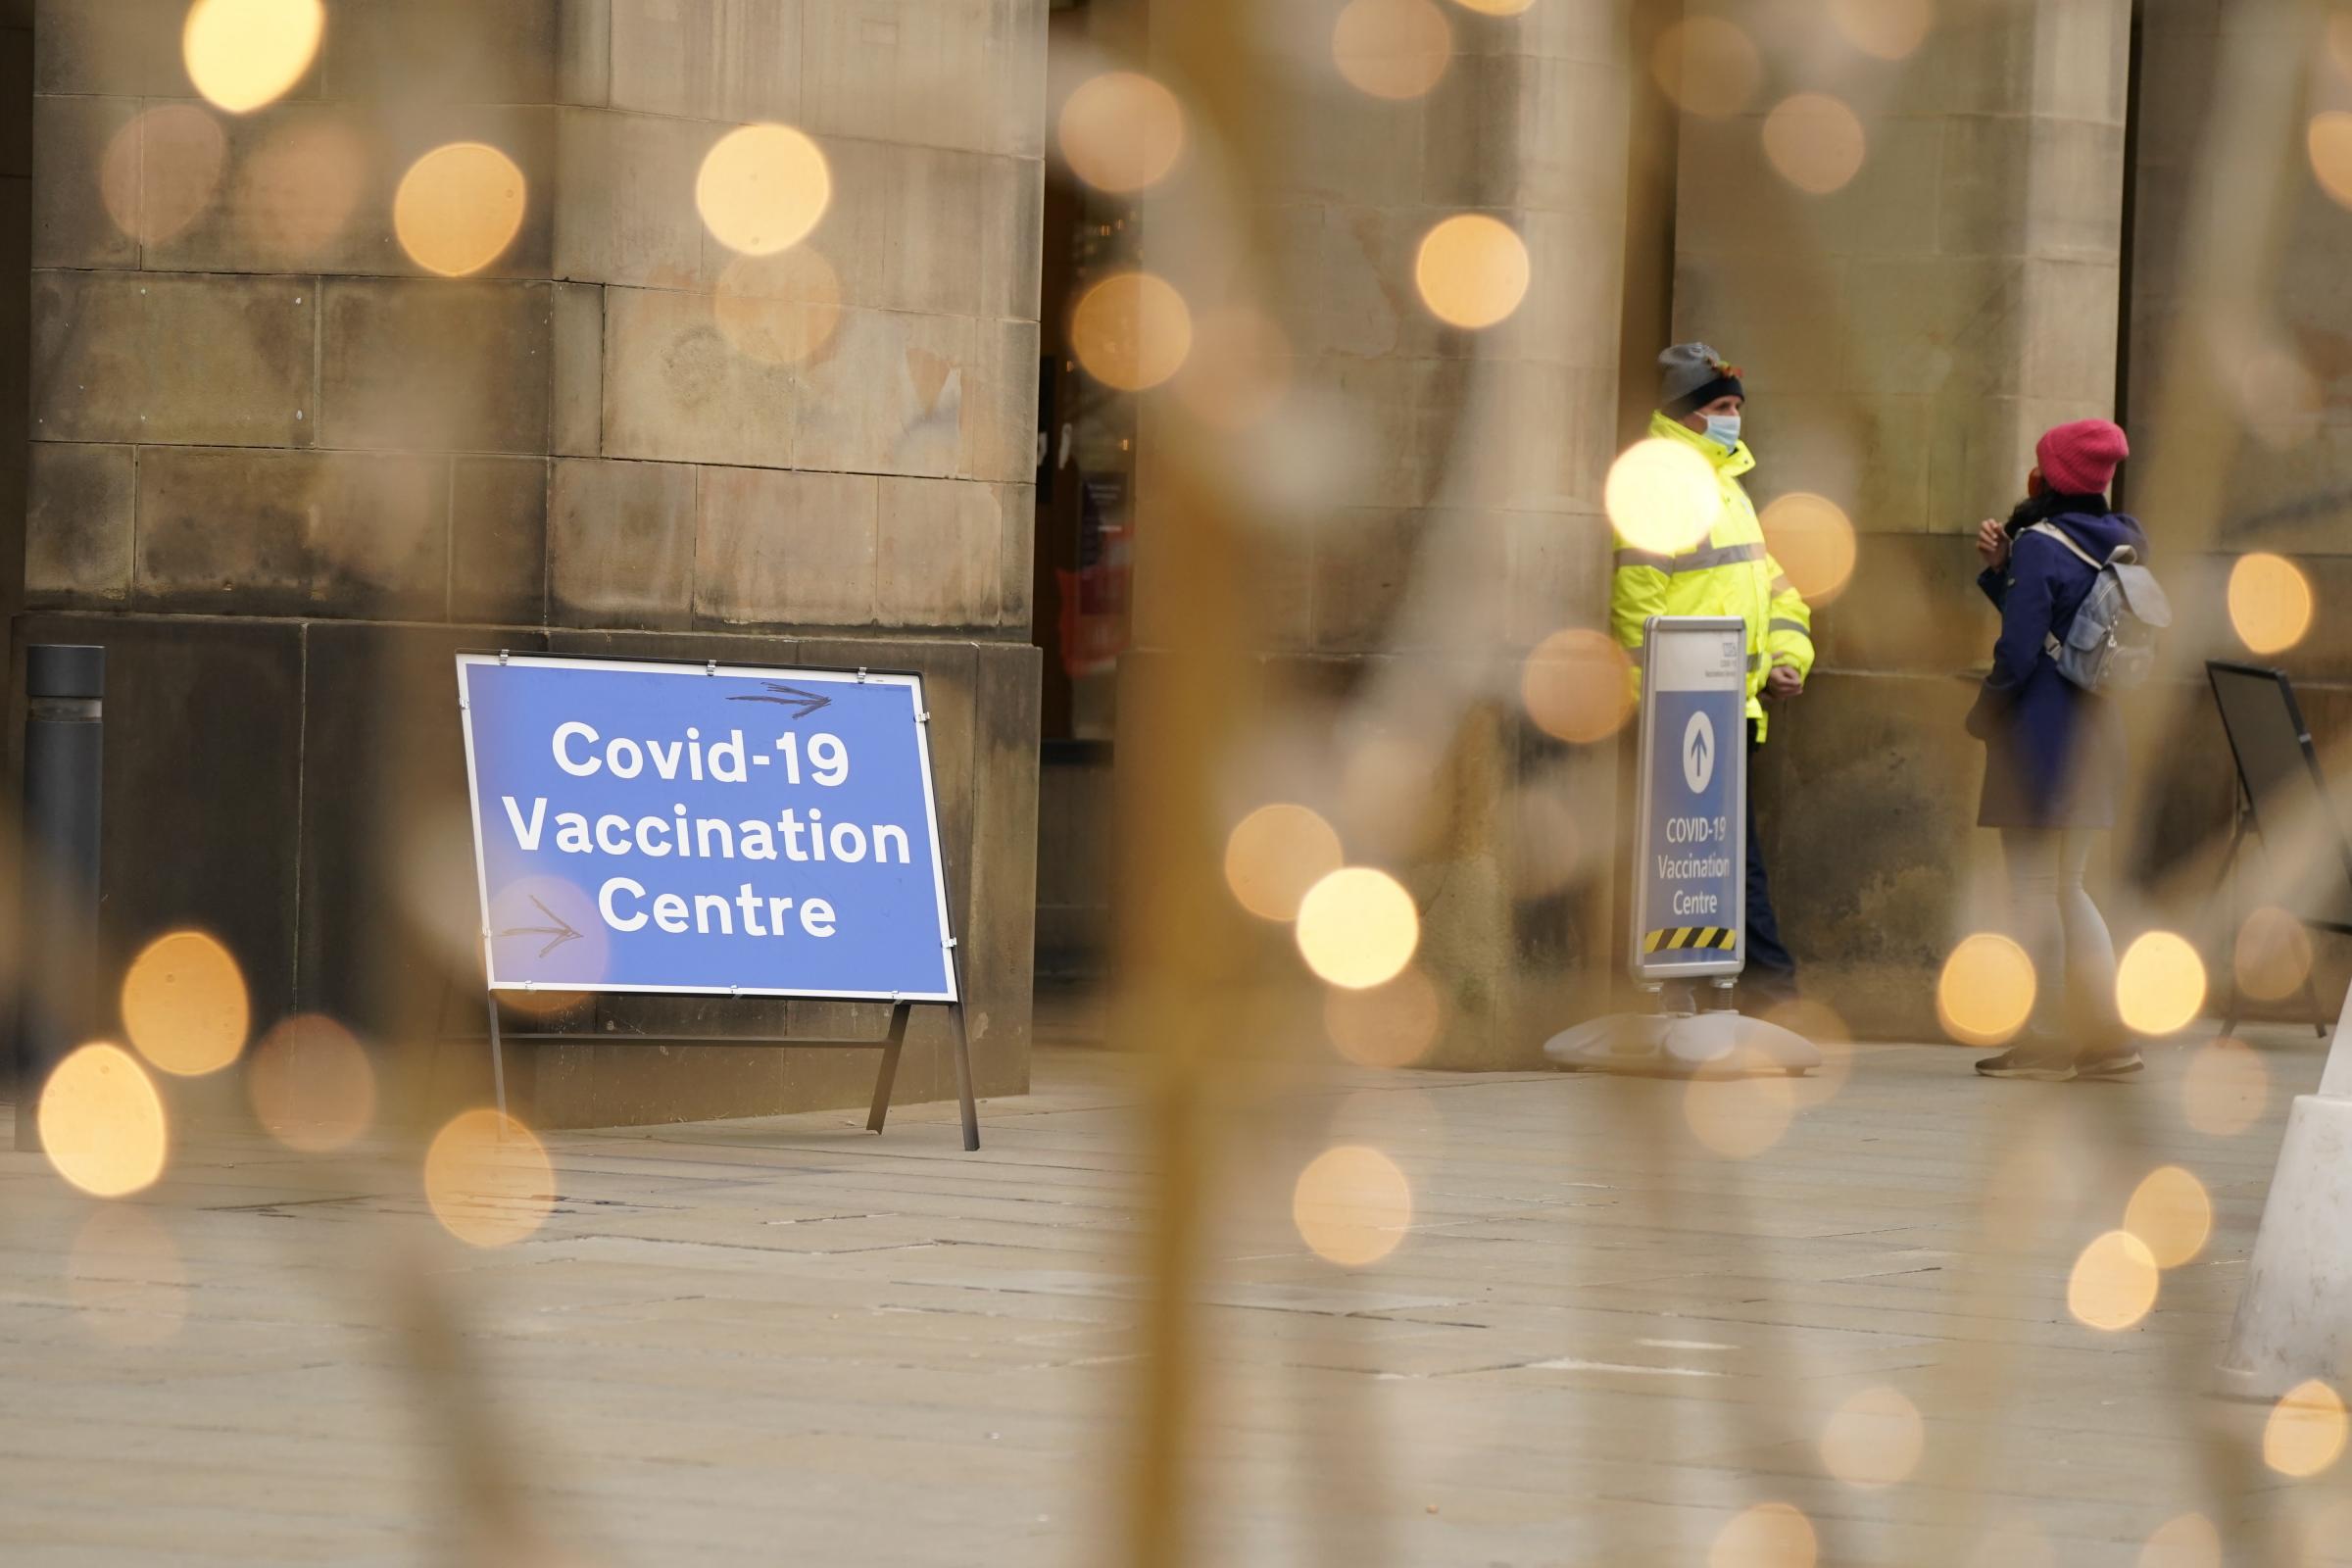 Positive cases for Covid pass 100,000 - the highest daily figure in the UK so far